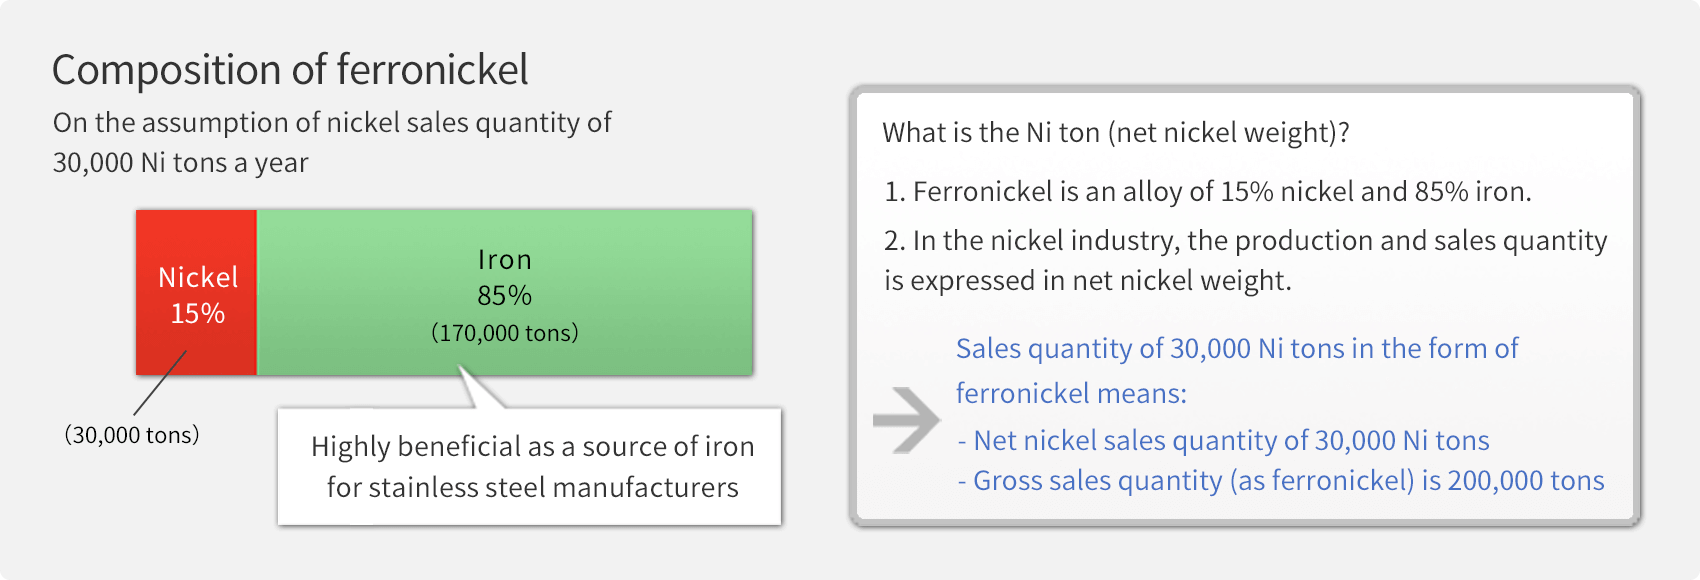 Composition in the case of selling 30,000 Ni tons in the form of ferronickel